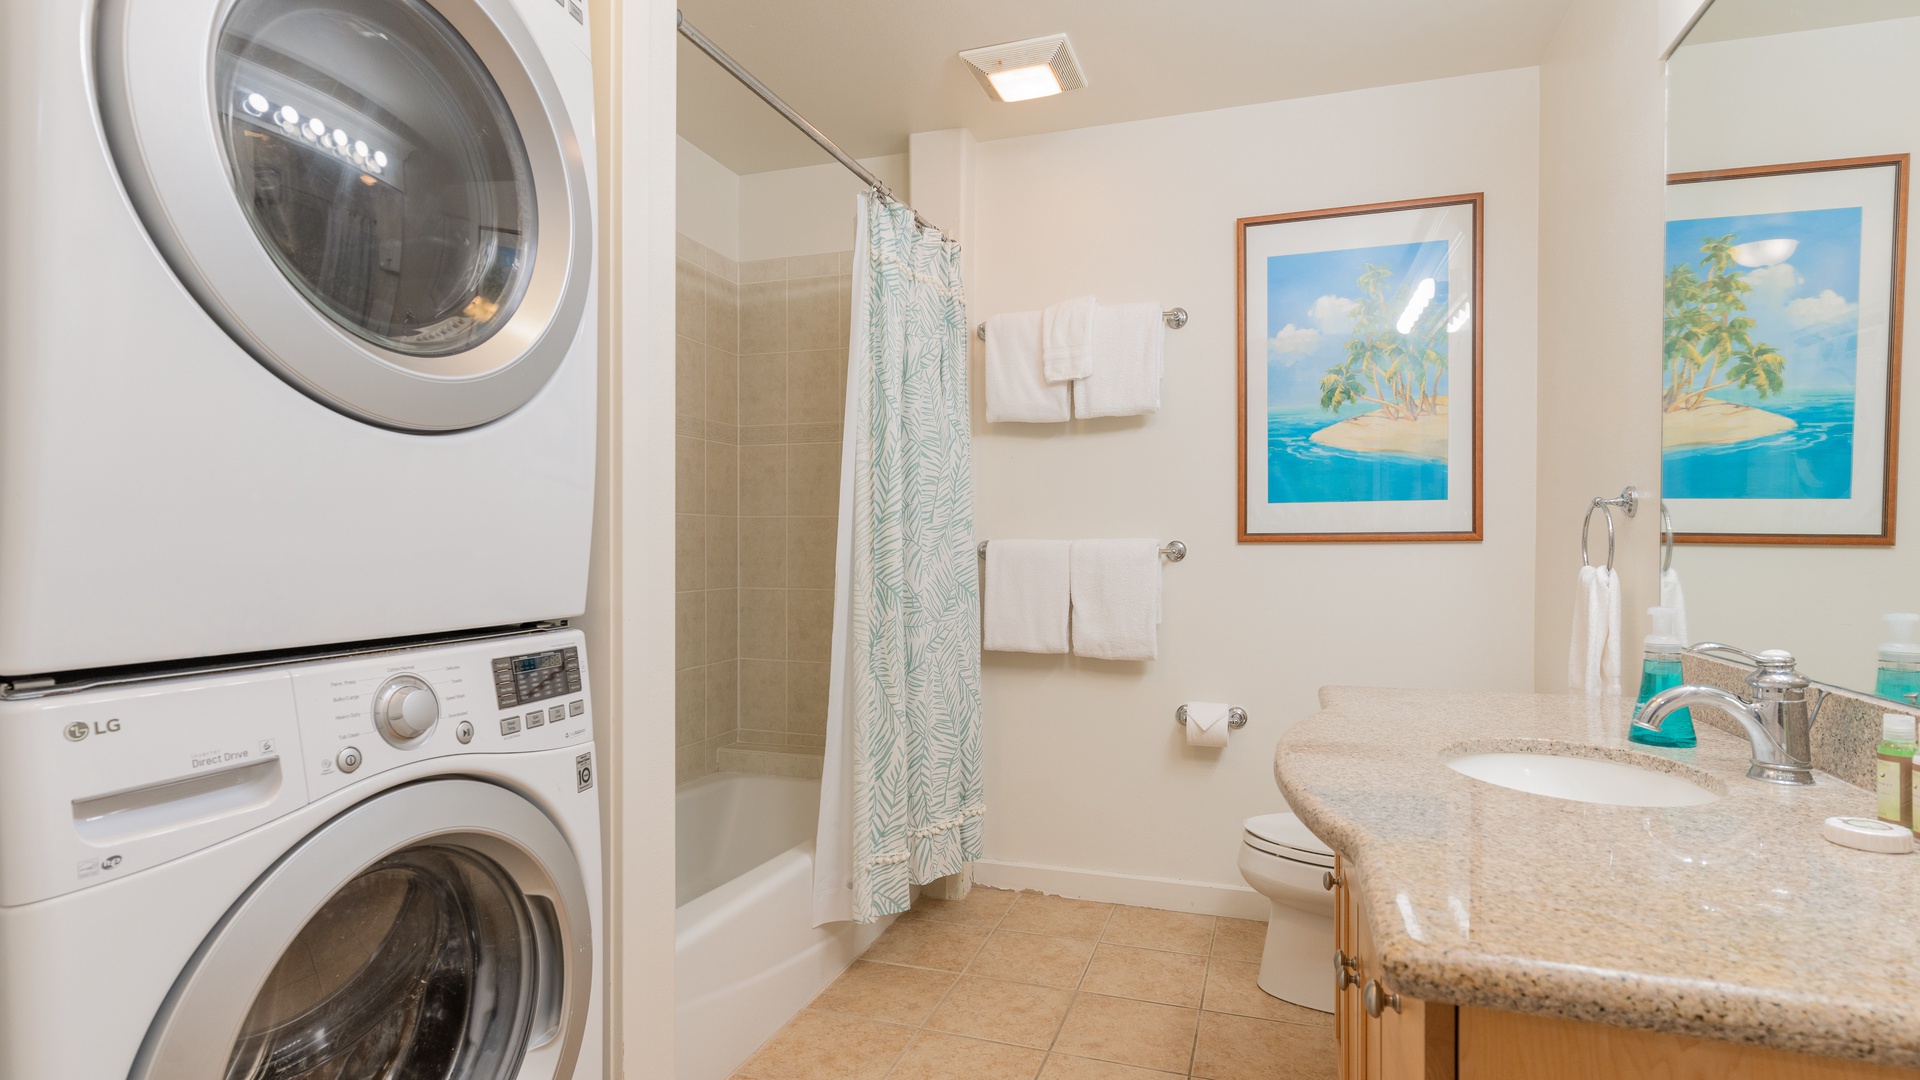 Kapolei Vacation Rentals, Kai Lani 8B - The second guest bathroom features a shower and washer / dryer combo.